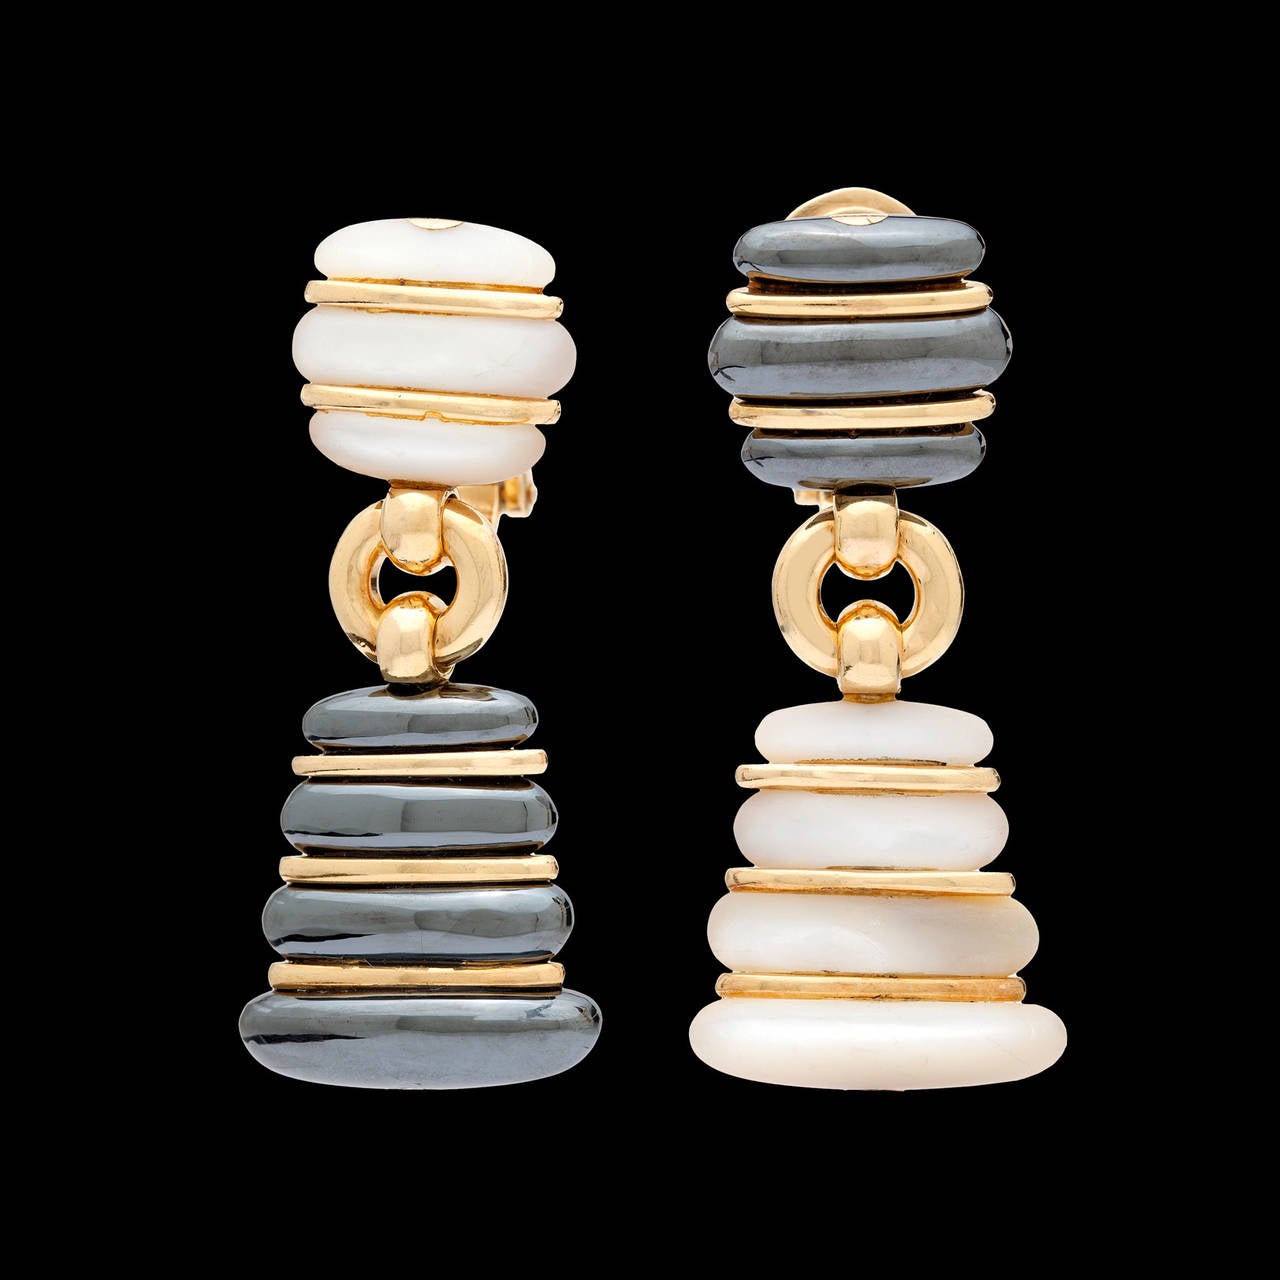 Estate Bulgari Hematite and Mother of Pearl Dangle Earrings set in 18Kt Yellow Gold. The earrings measure approximately 1.50 inches long. The width tapers from .50 to .75 inches. The total weight of the pair is 26.4 grams.